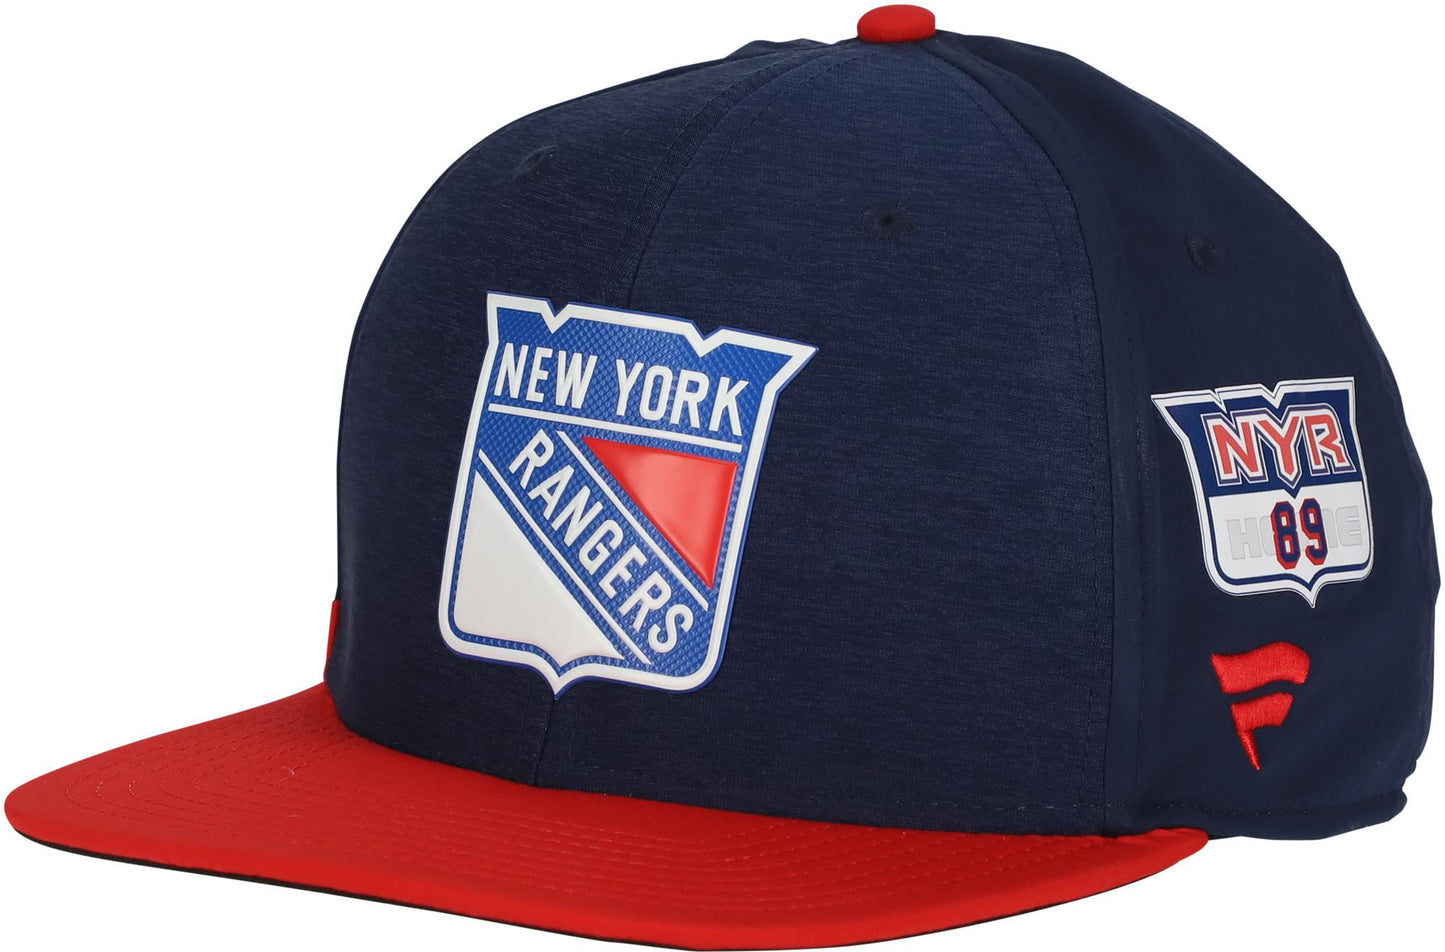 Pavel Buchnevich New York Rangers Player-Worn #89 Navy and Red Snapback Cap from the 2021 NHL Season